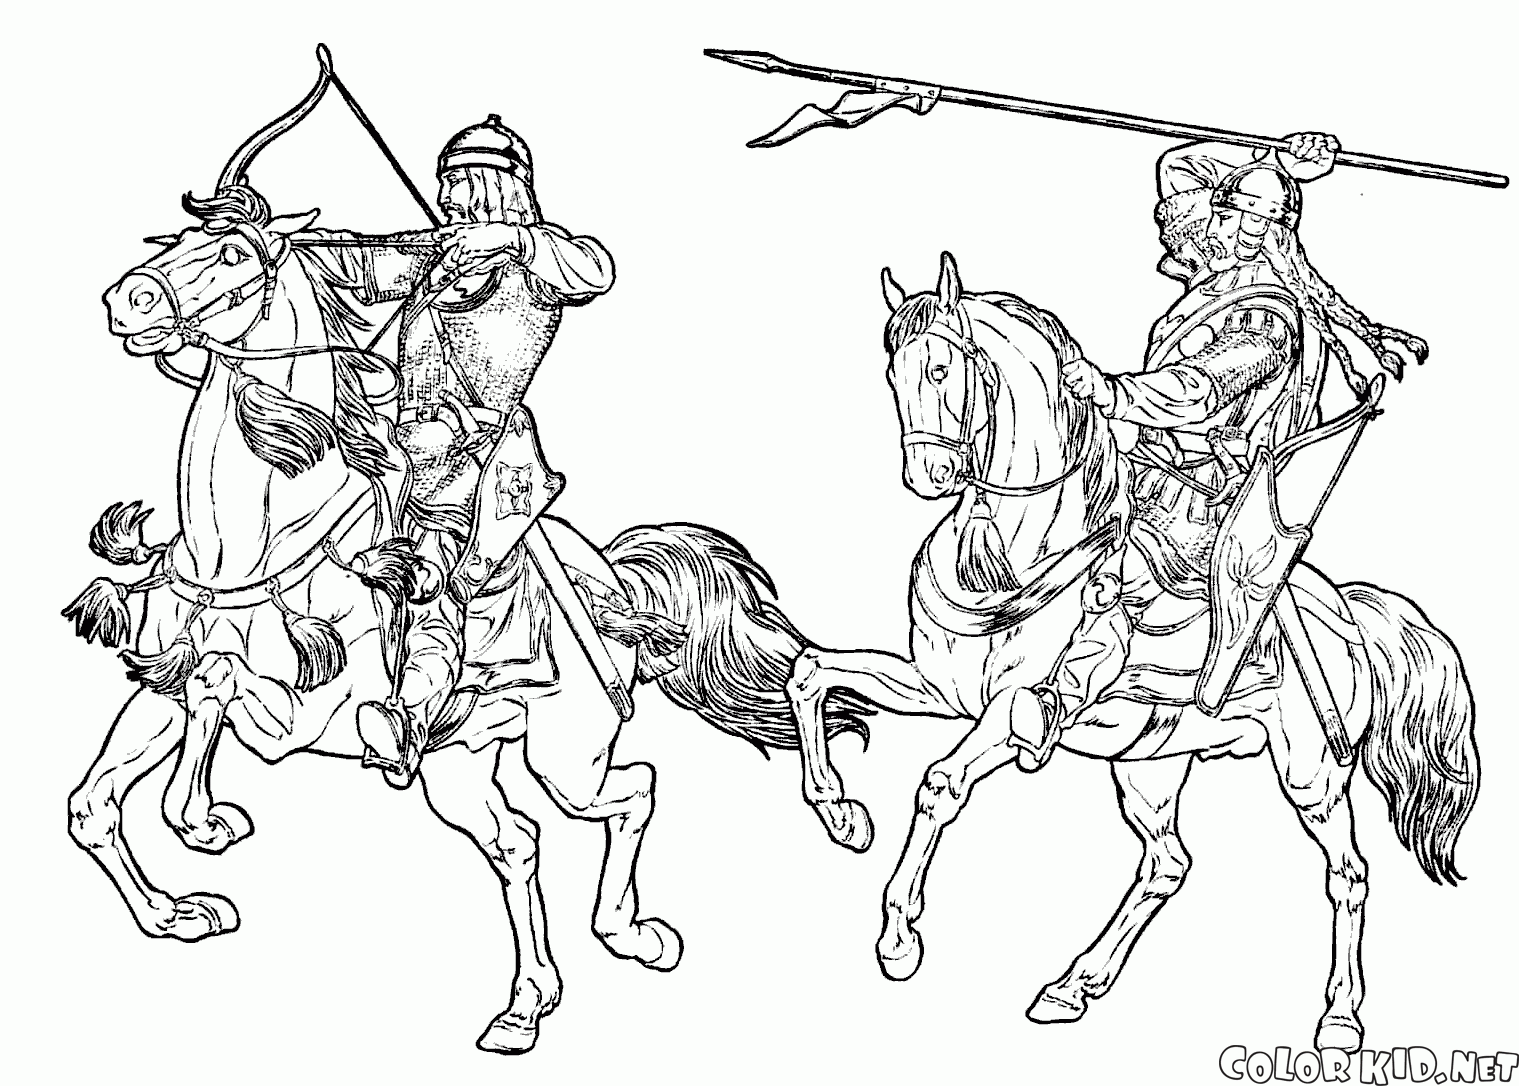 Coloring page - Horse riders